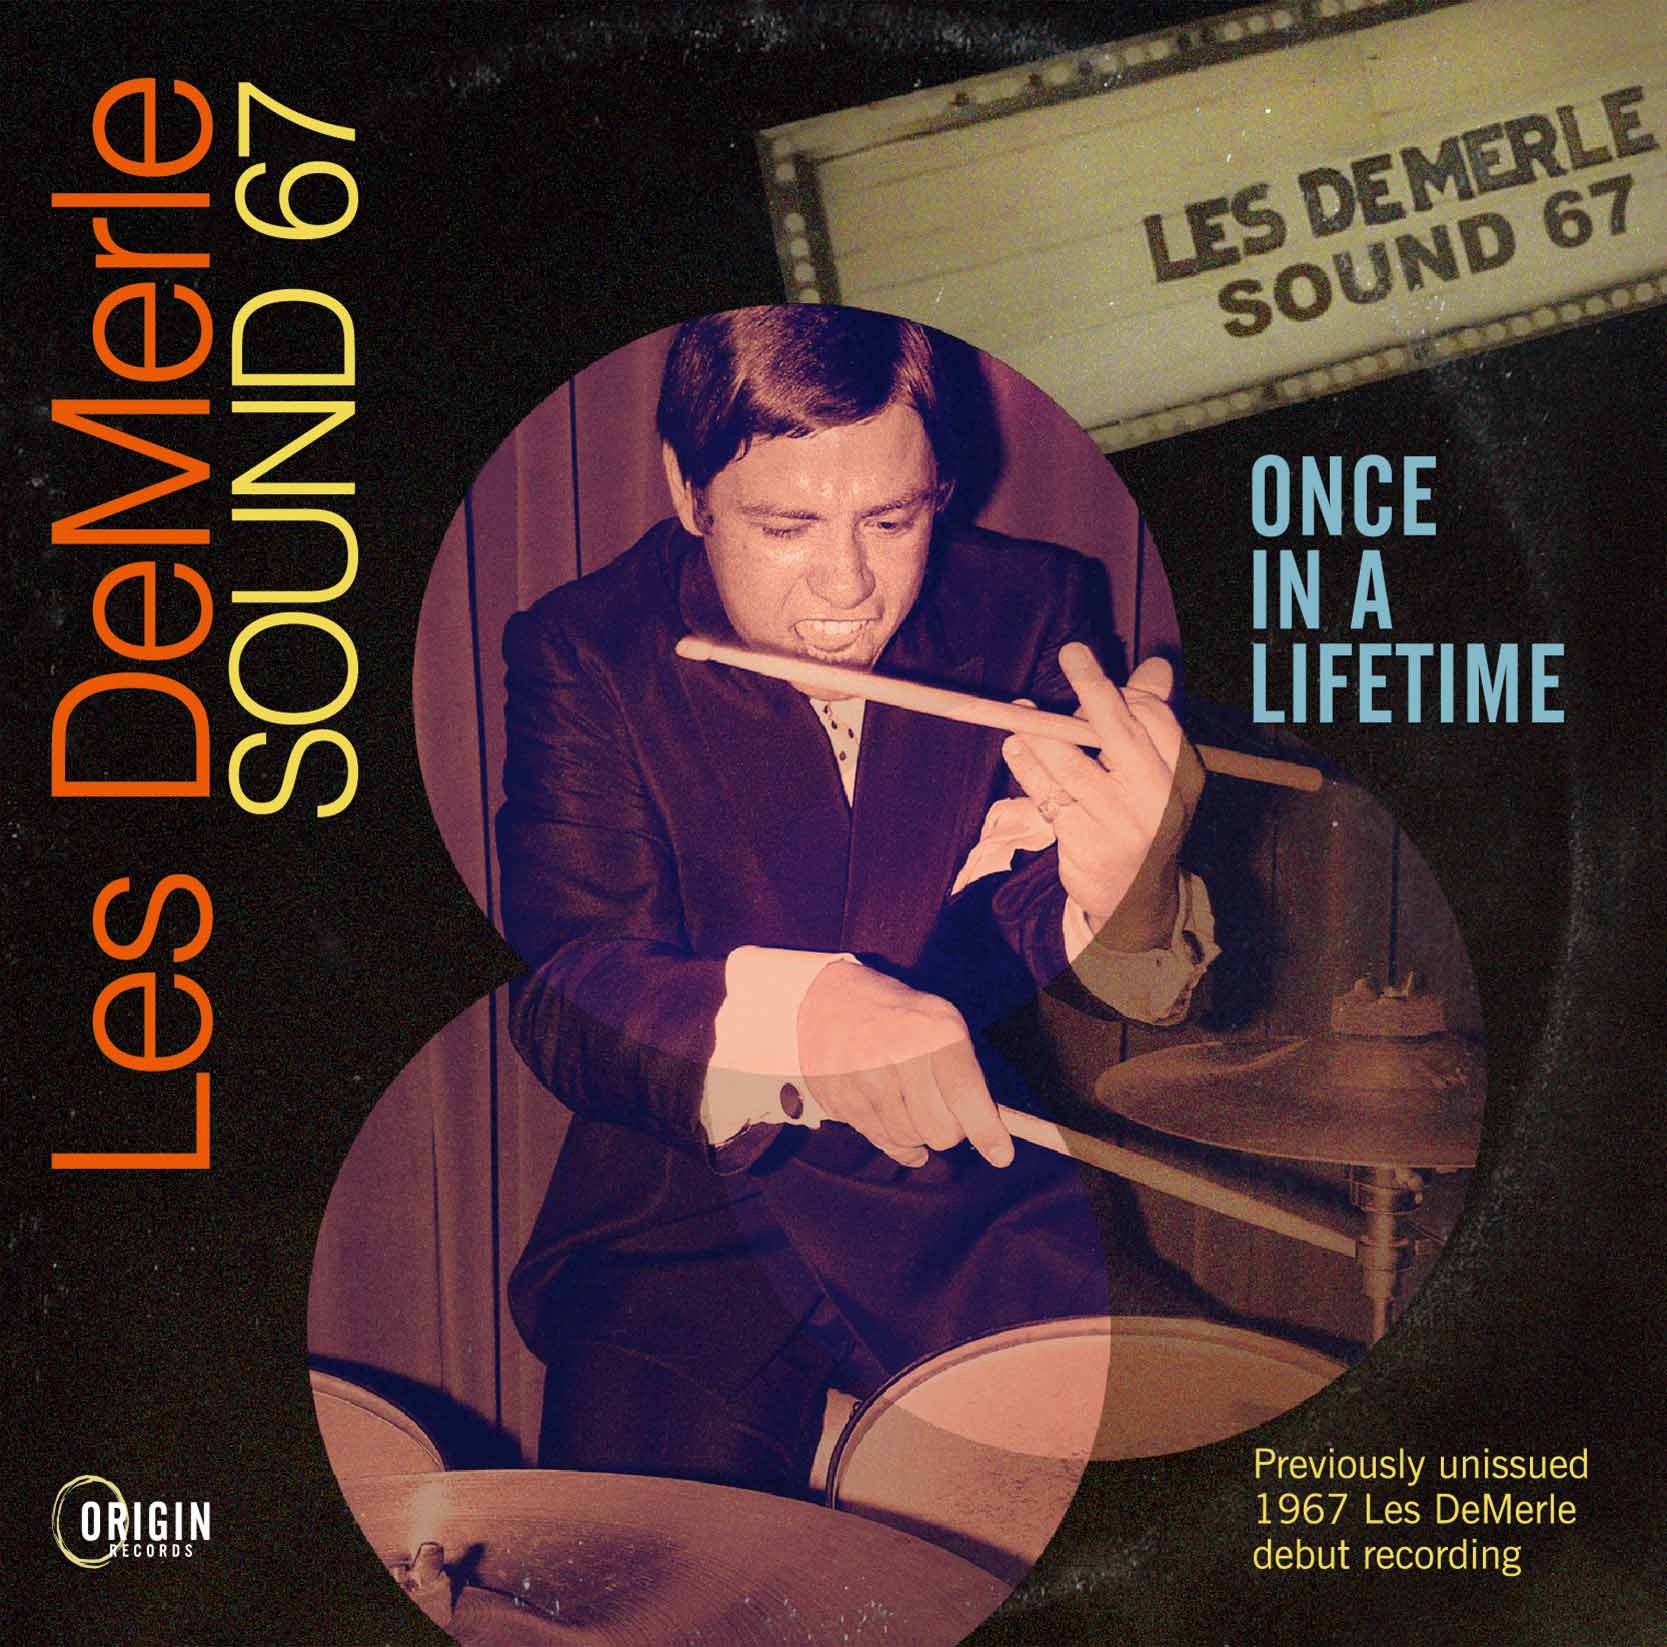 Les Demerle Sound 67 featuring Randy Brecker「Once In A Lifetime」